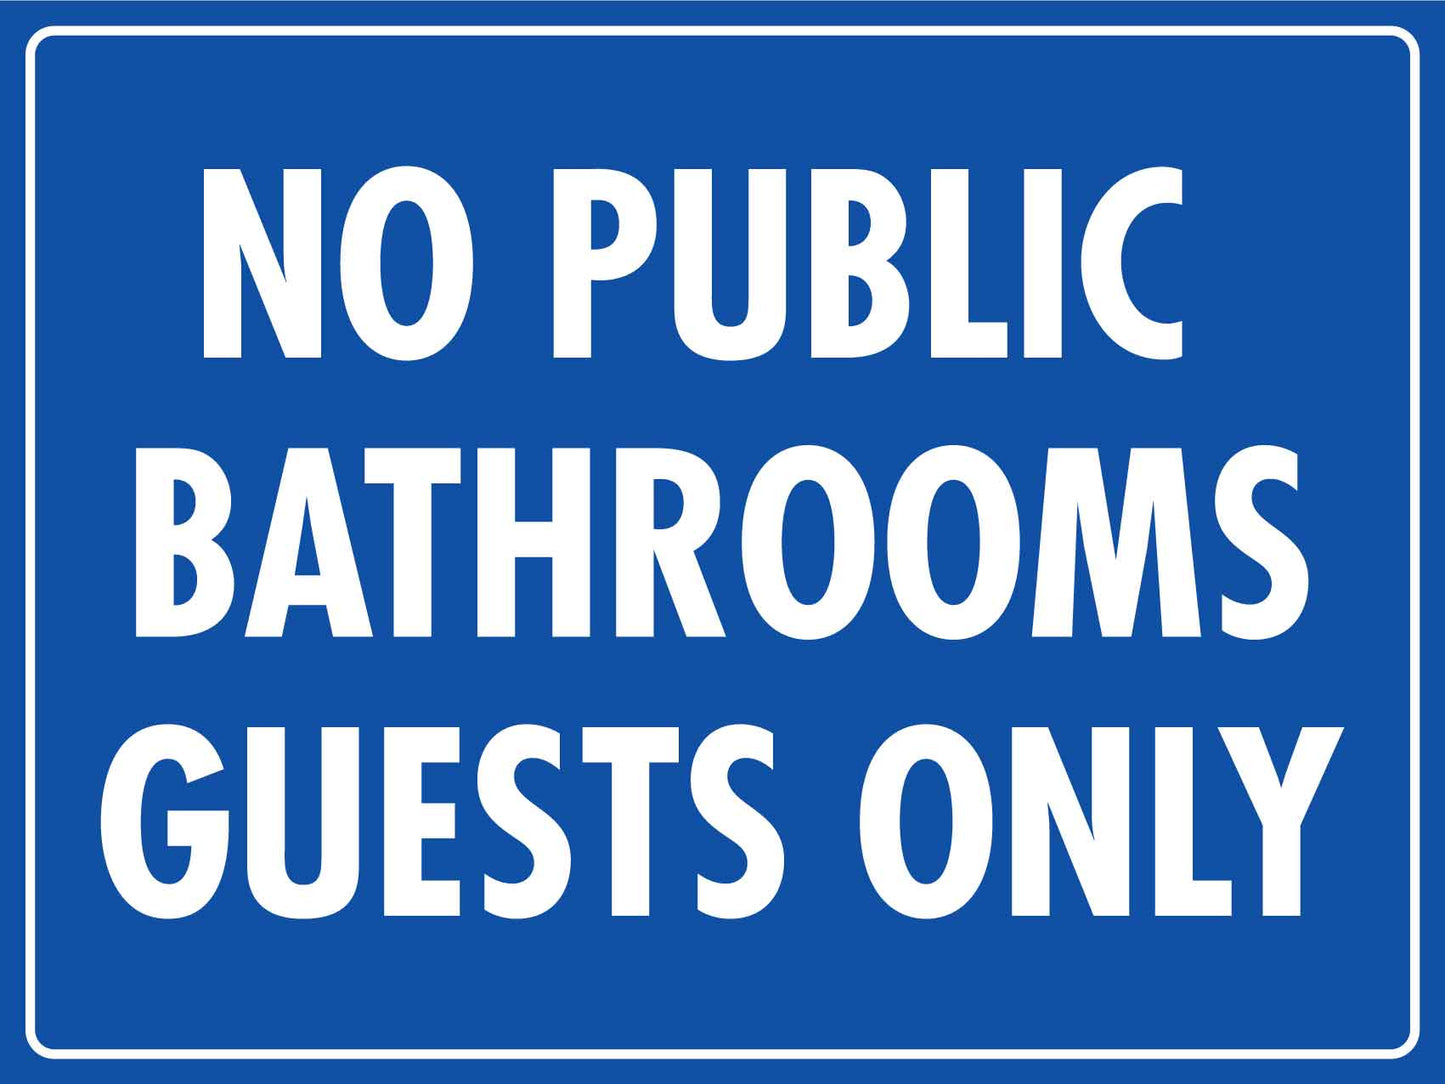 No Public Bathrooms Guests Only Sign